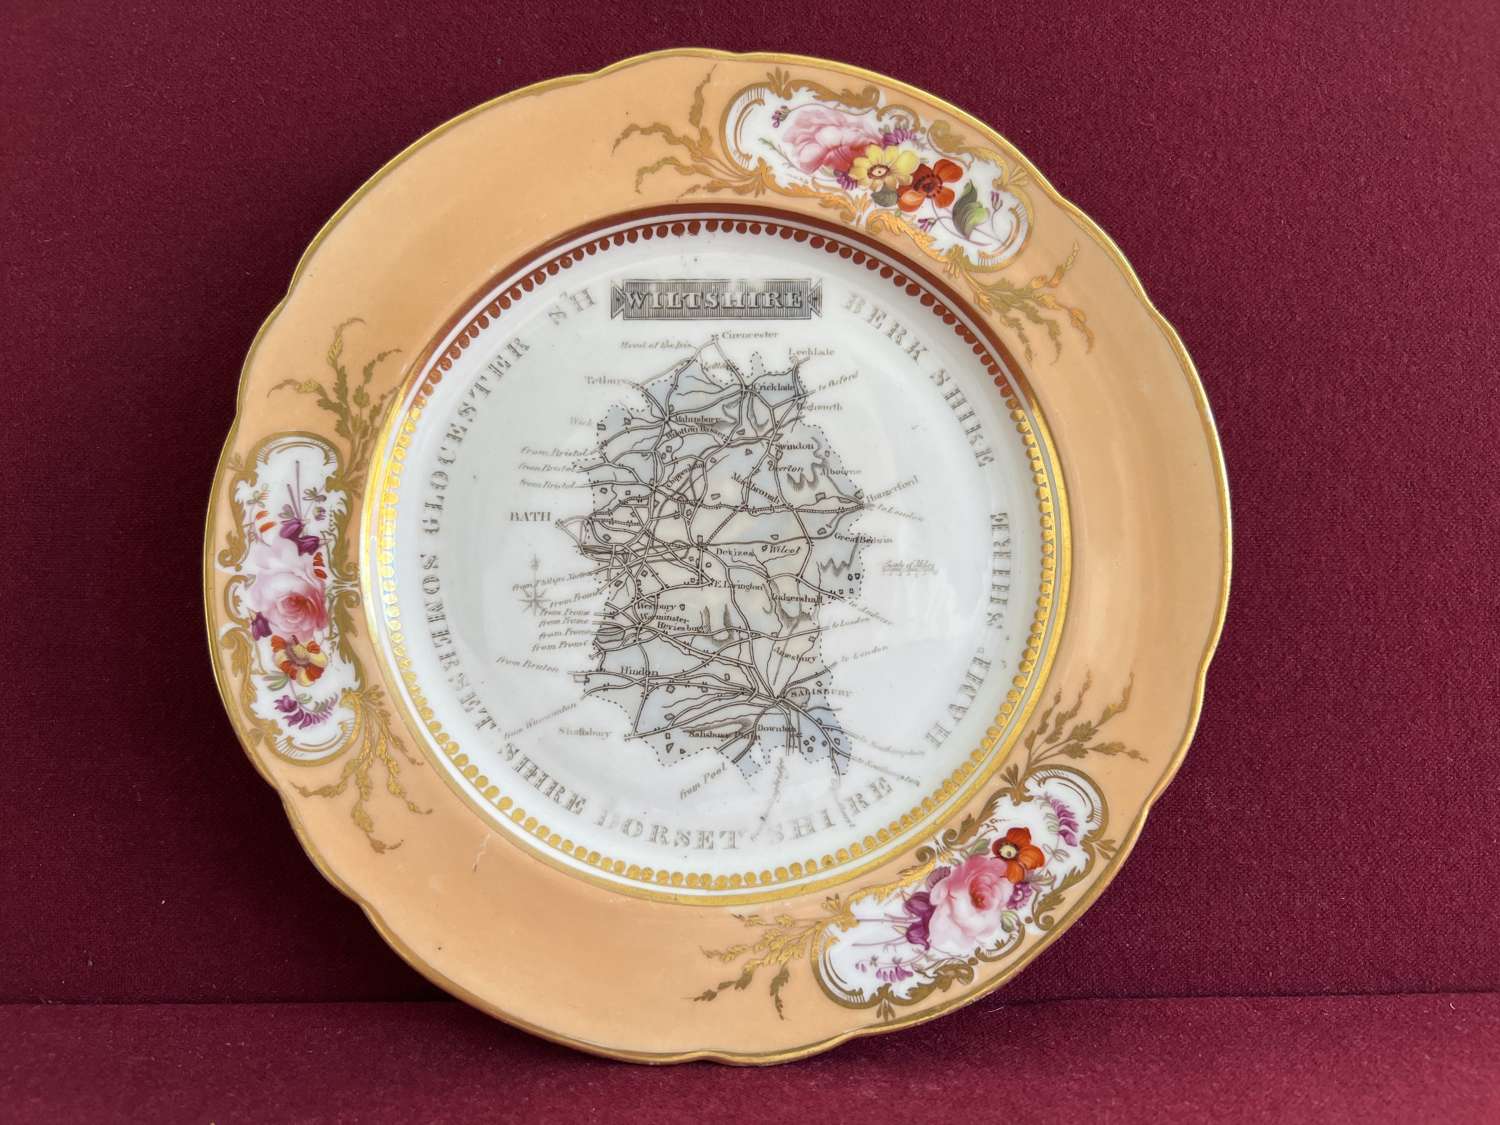 A rare Coalport Porcelain Plate with a Map of Wiltshire c.1835-1840